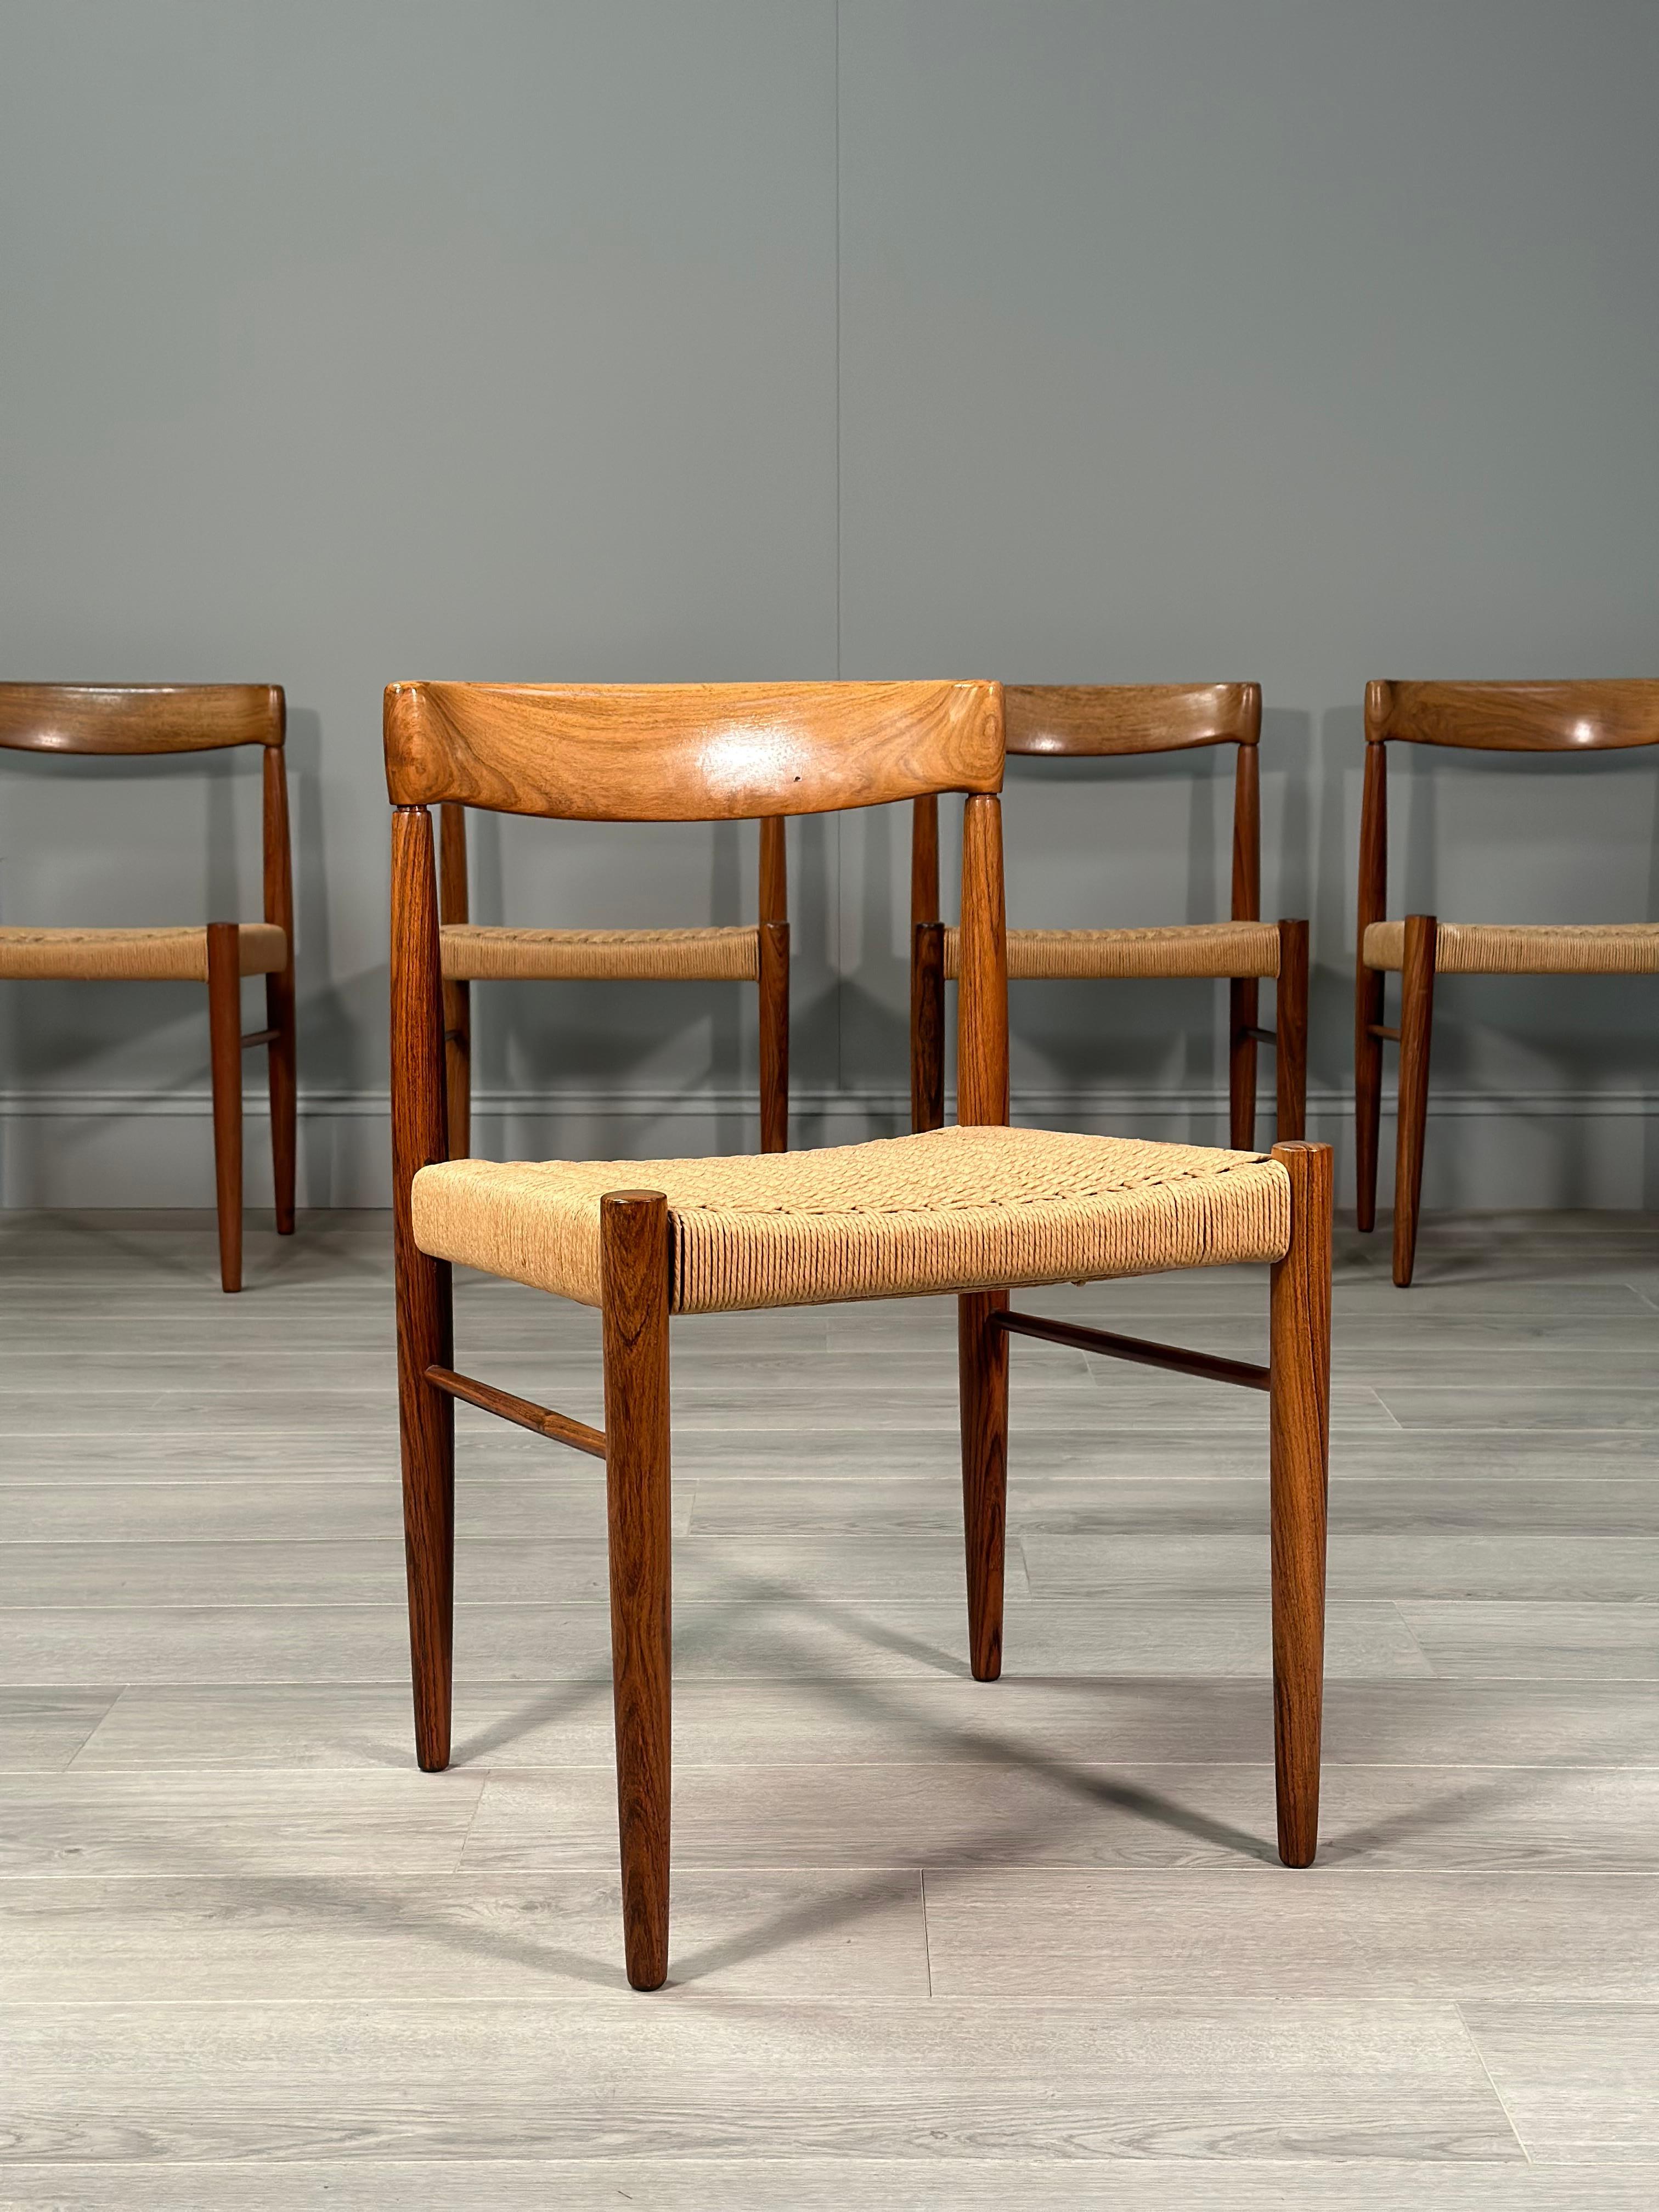 A superb set of 6 dining chairs designed by H.W. Klein for Bramin, Denmark. The Chairs have a solid rosewood frame with original paper cord seats all of which are in very good condition with some slight discolouration to one.